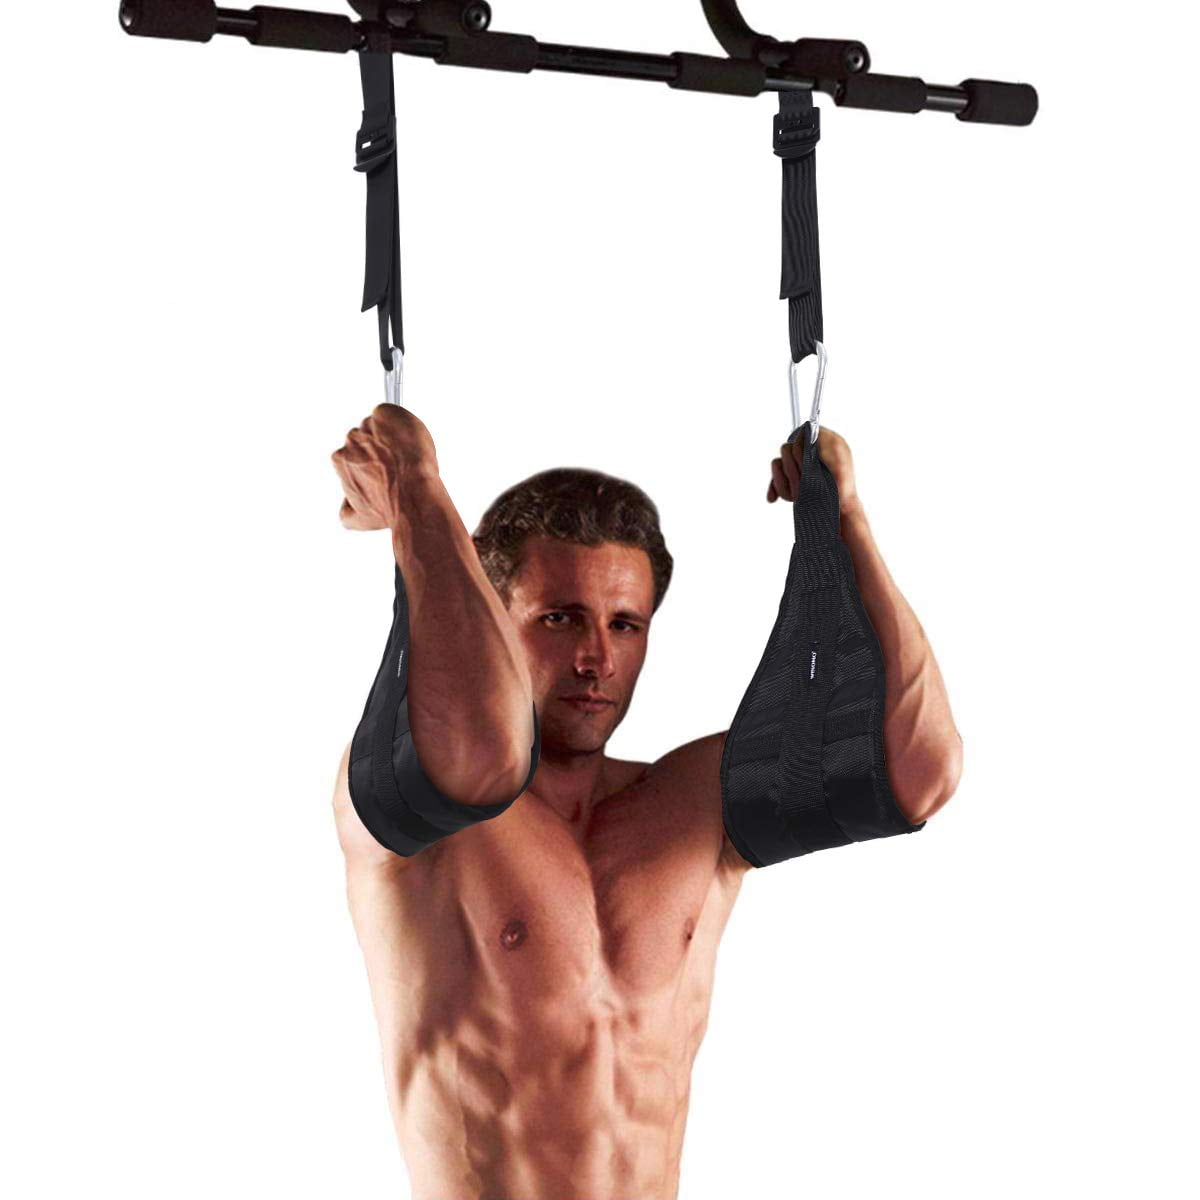 Details about   Heavy Duty Sling Ab Hanging Straps Ab-Crunch Boxing Weight Lifting Gym Fitness 